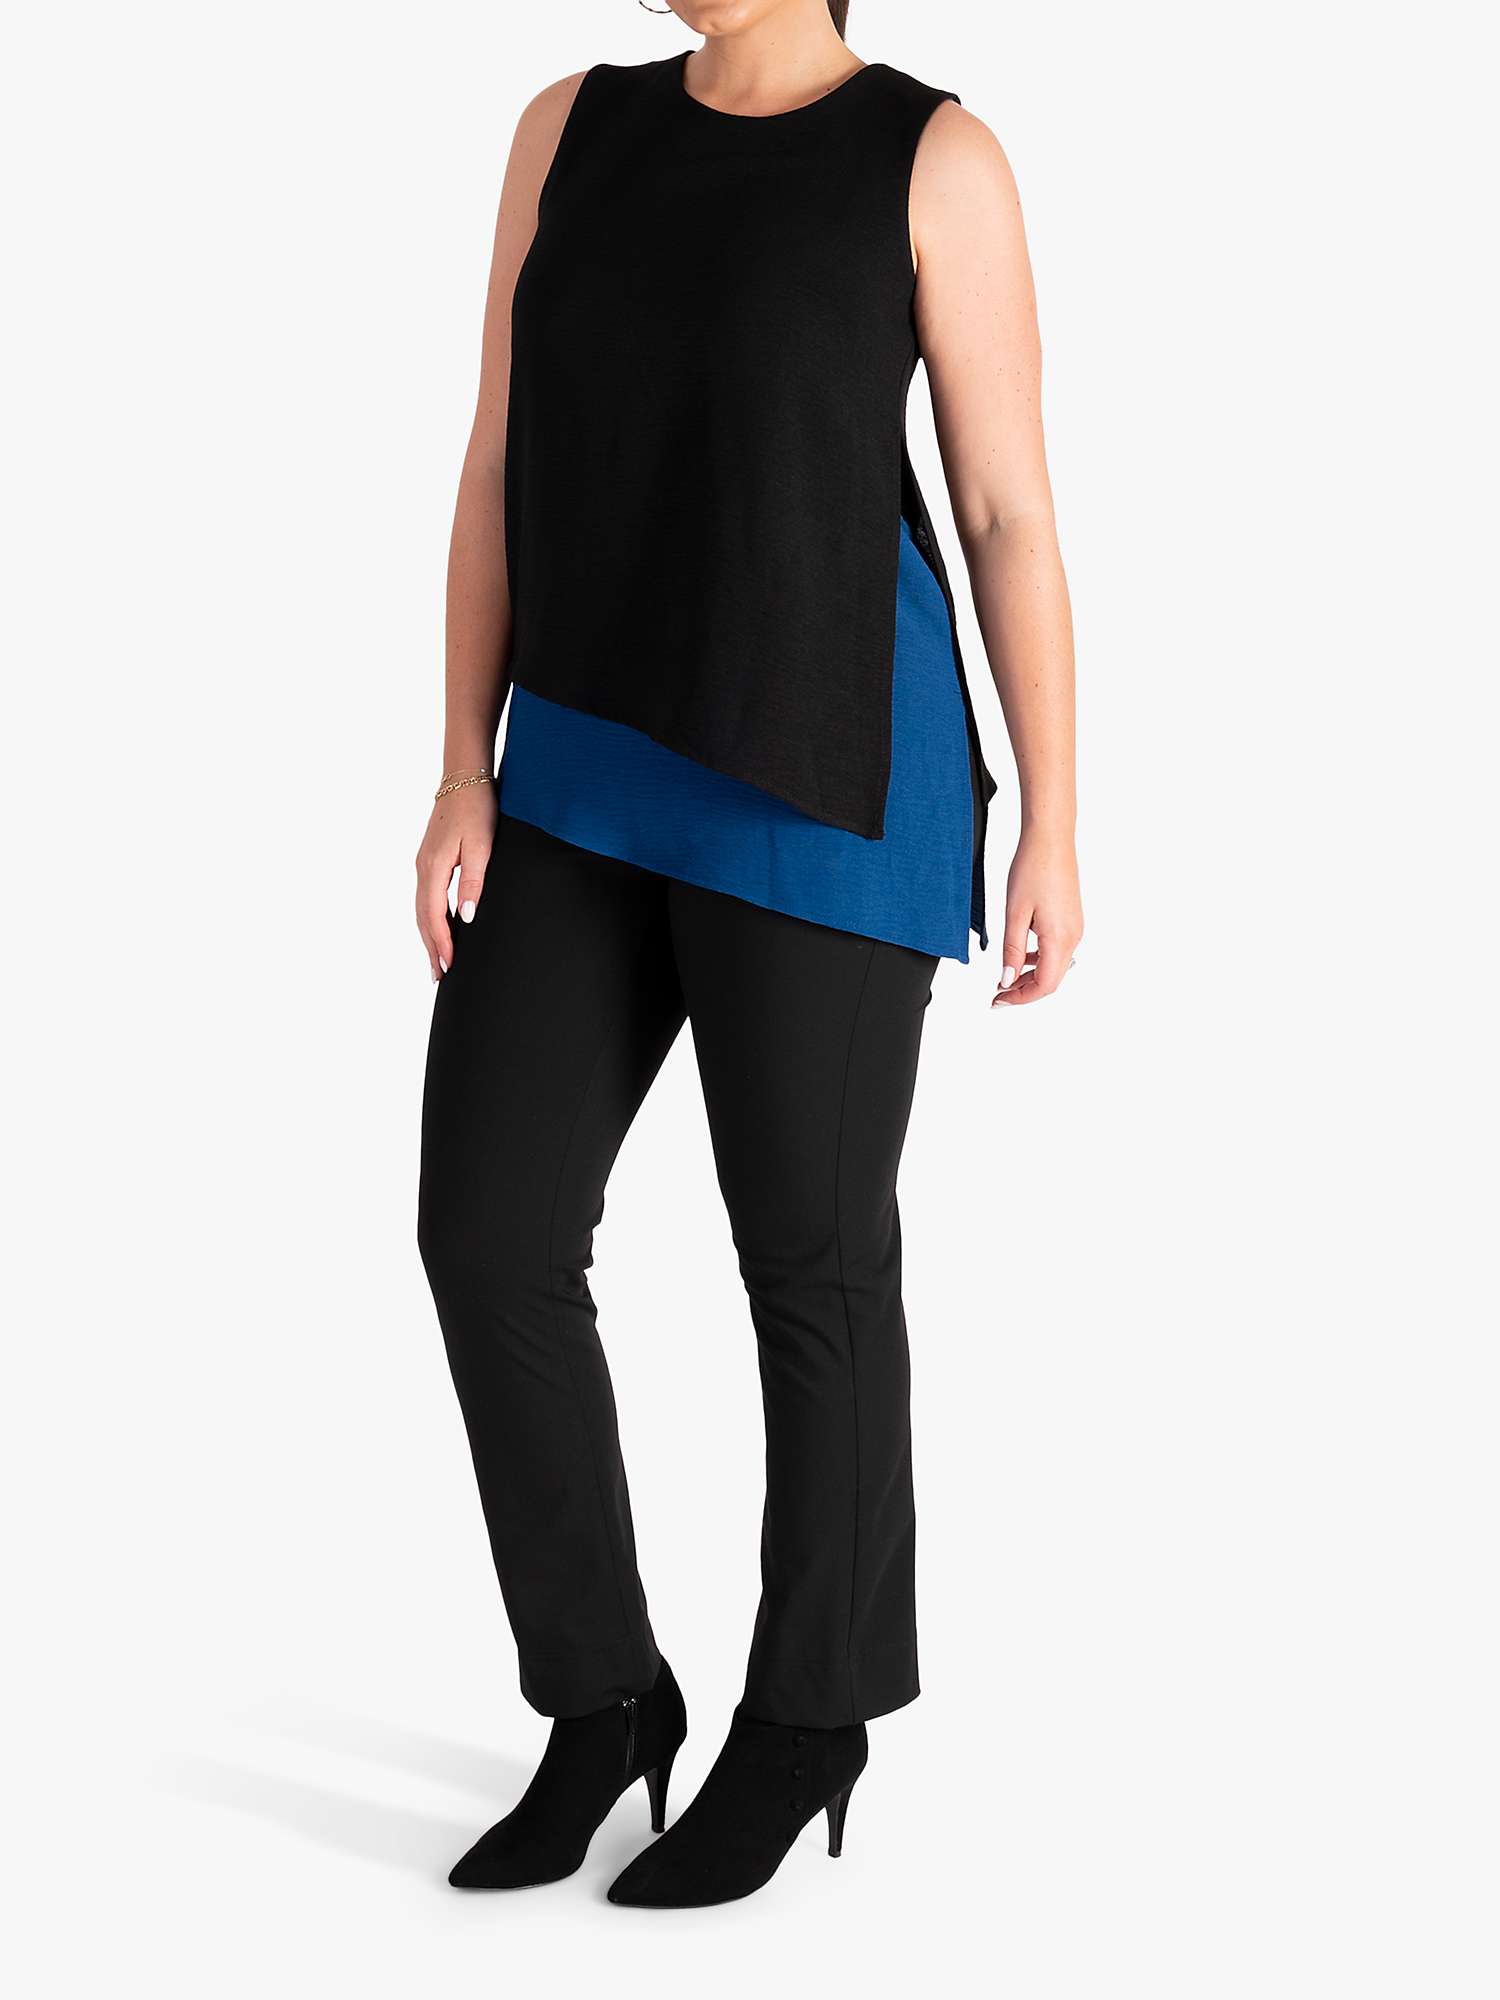 Buy chesca Contrast Layered Sleeveless Top, Black/Royal Blue Online at johnlewis.com